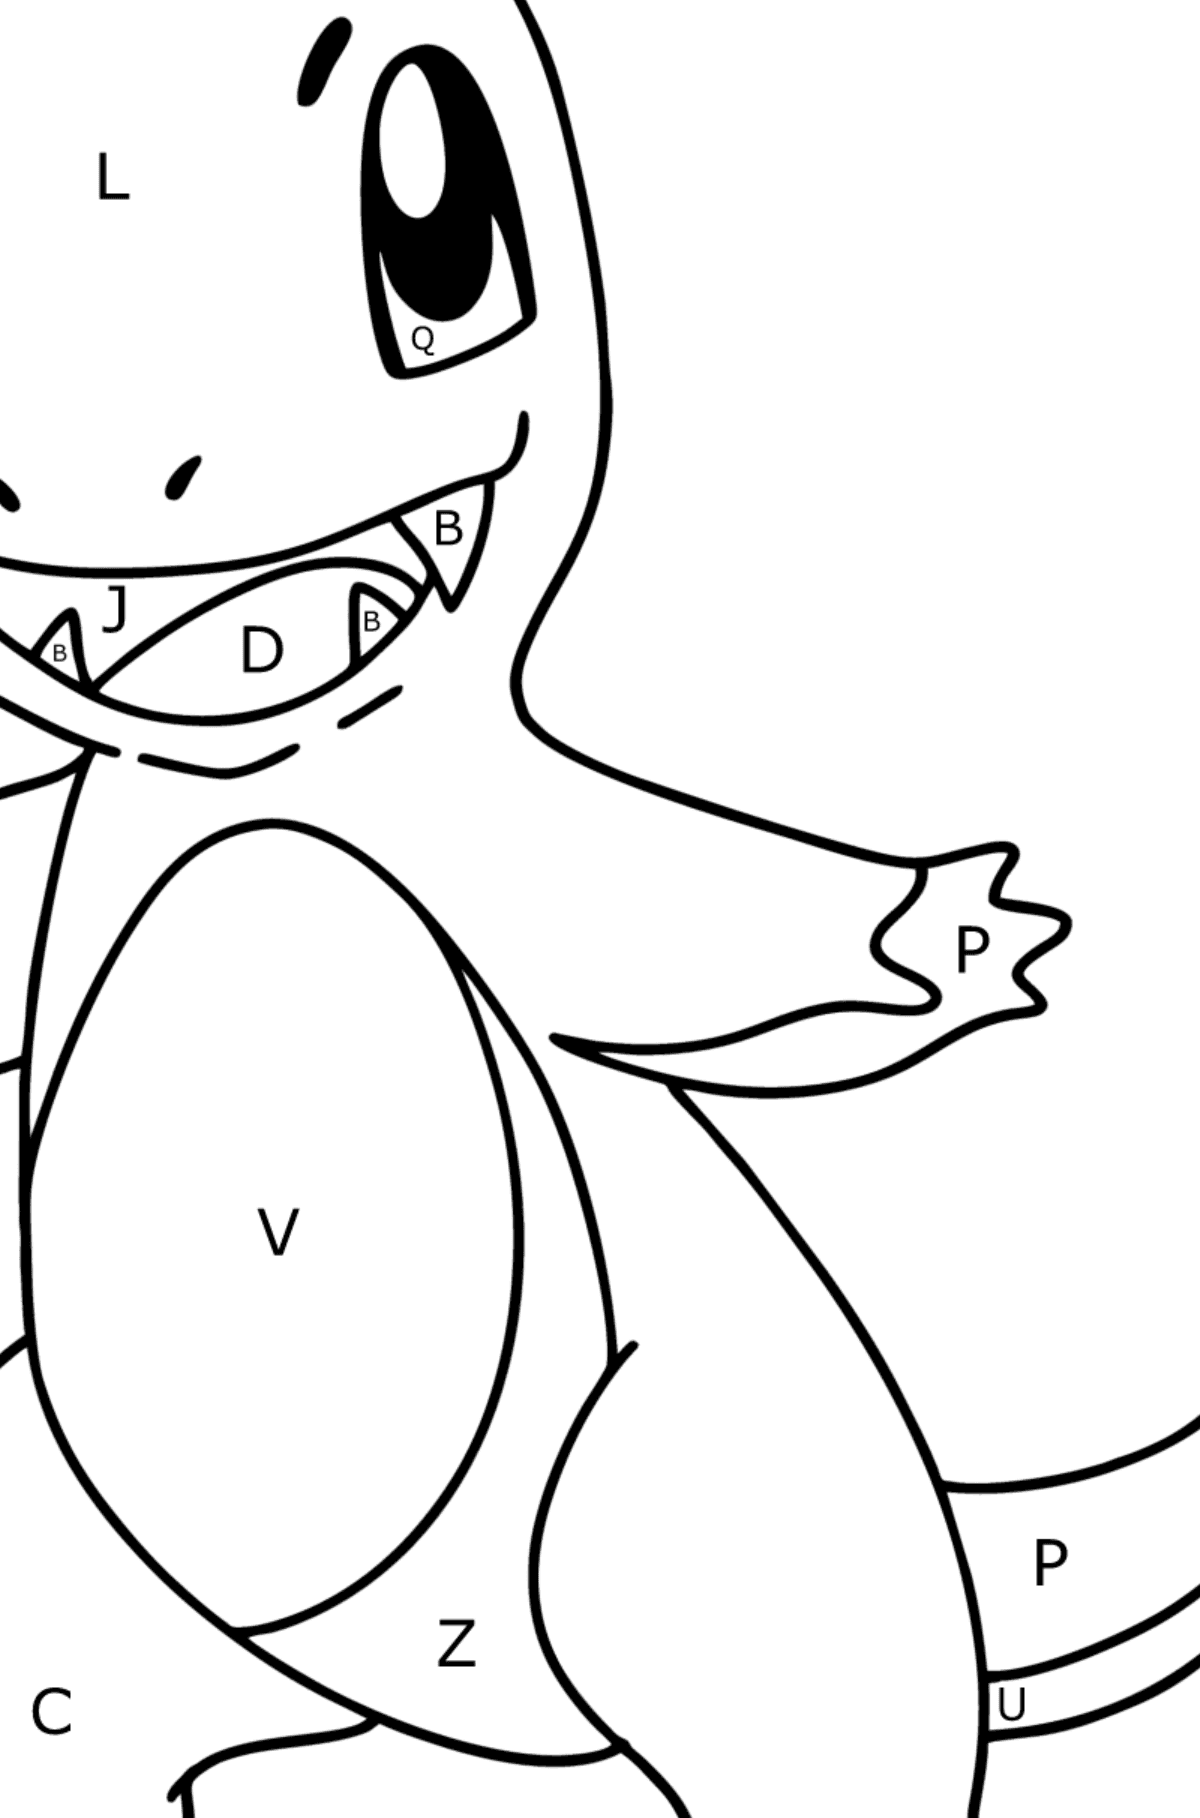 Pokémon Go Charmander coloring page - Coloring by Letters for Kids